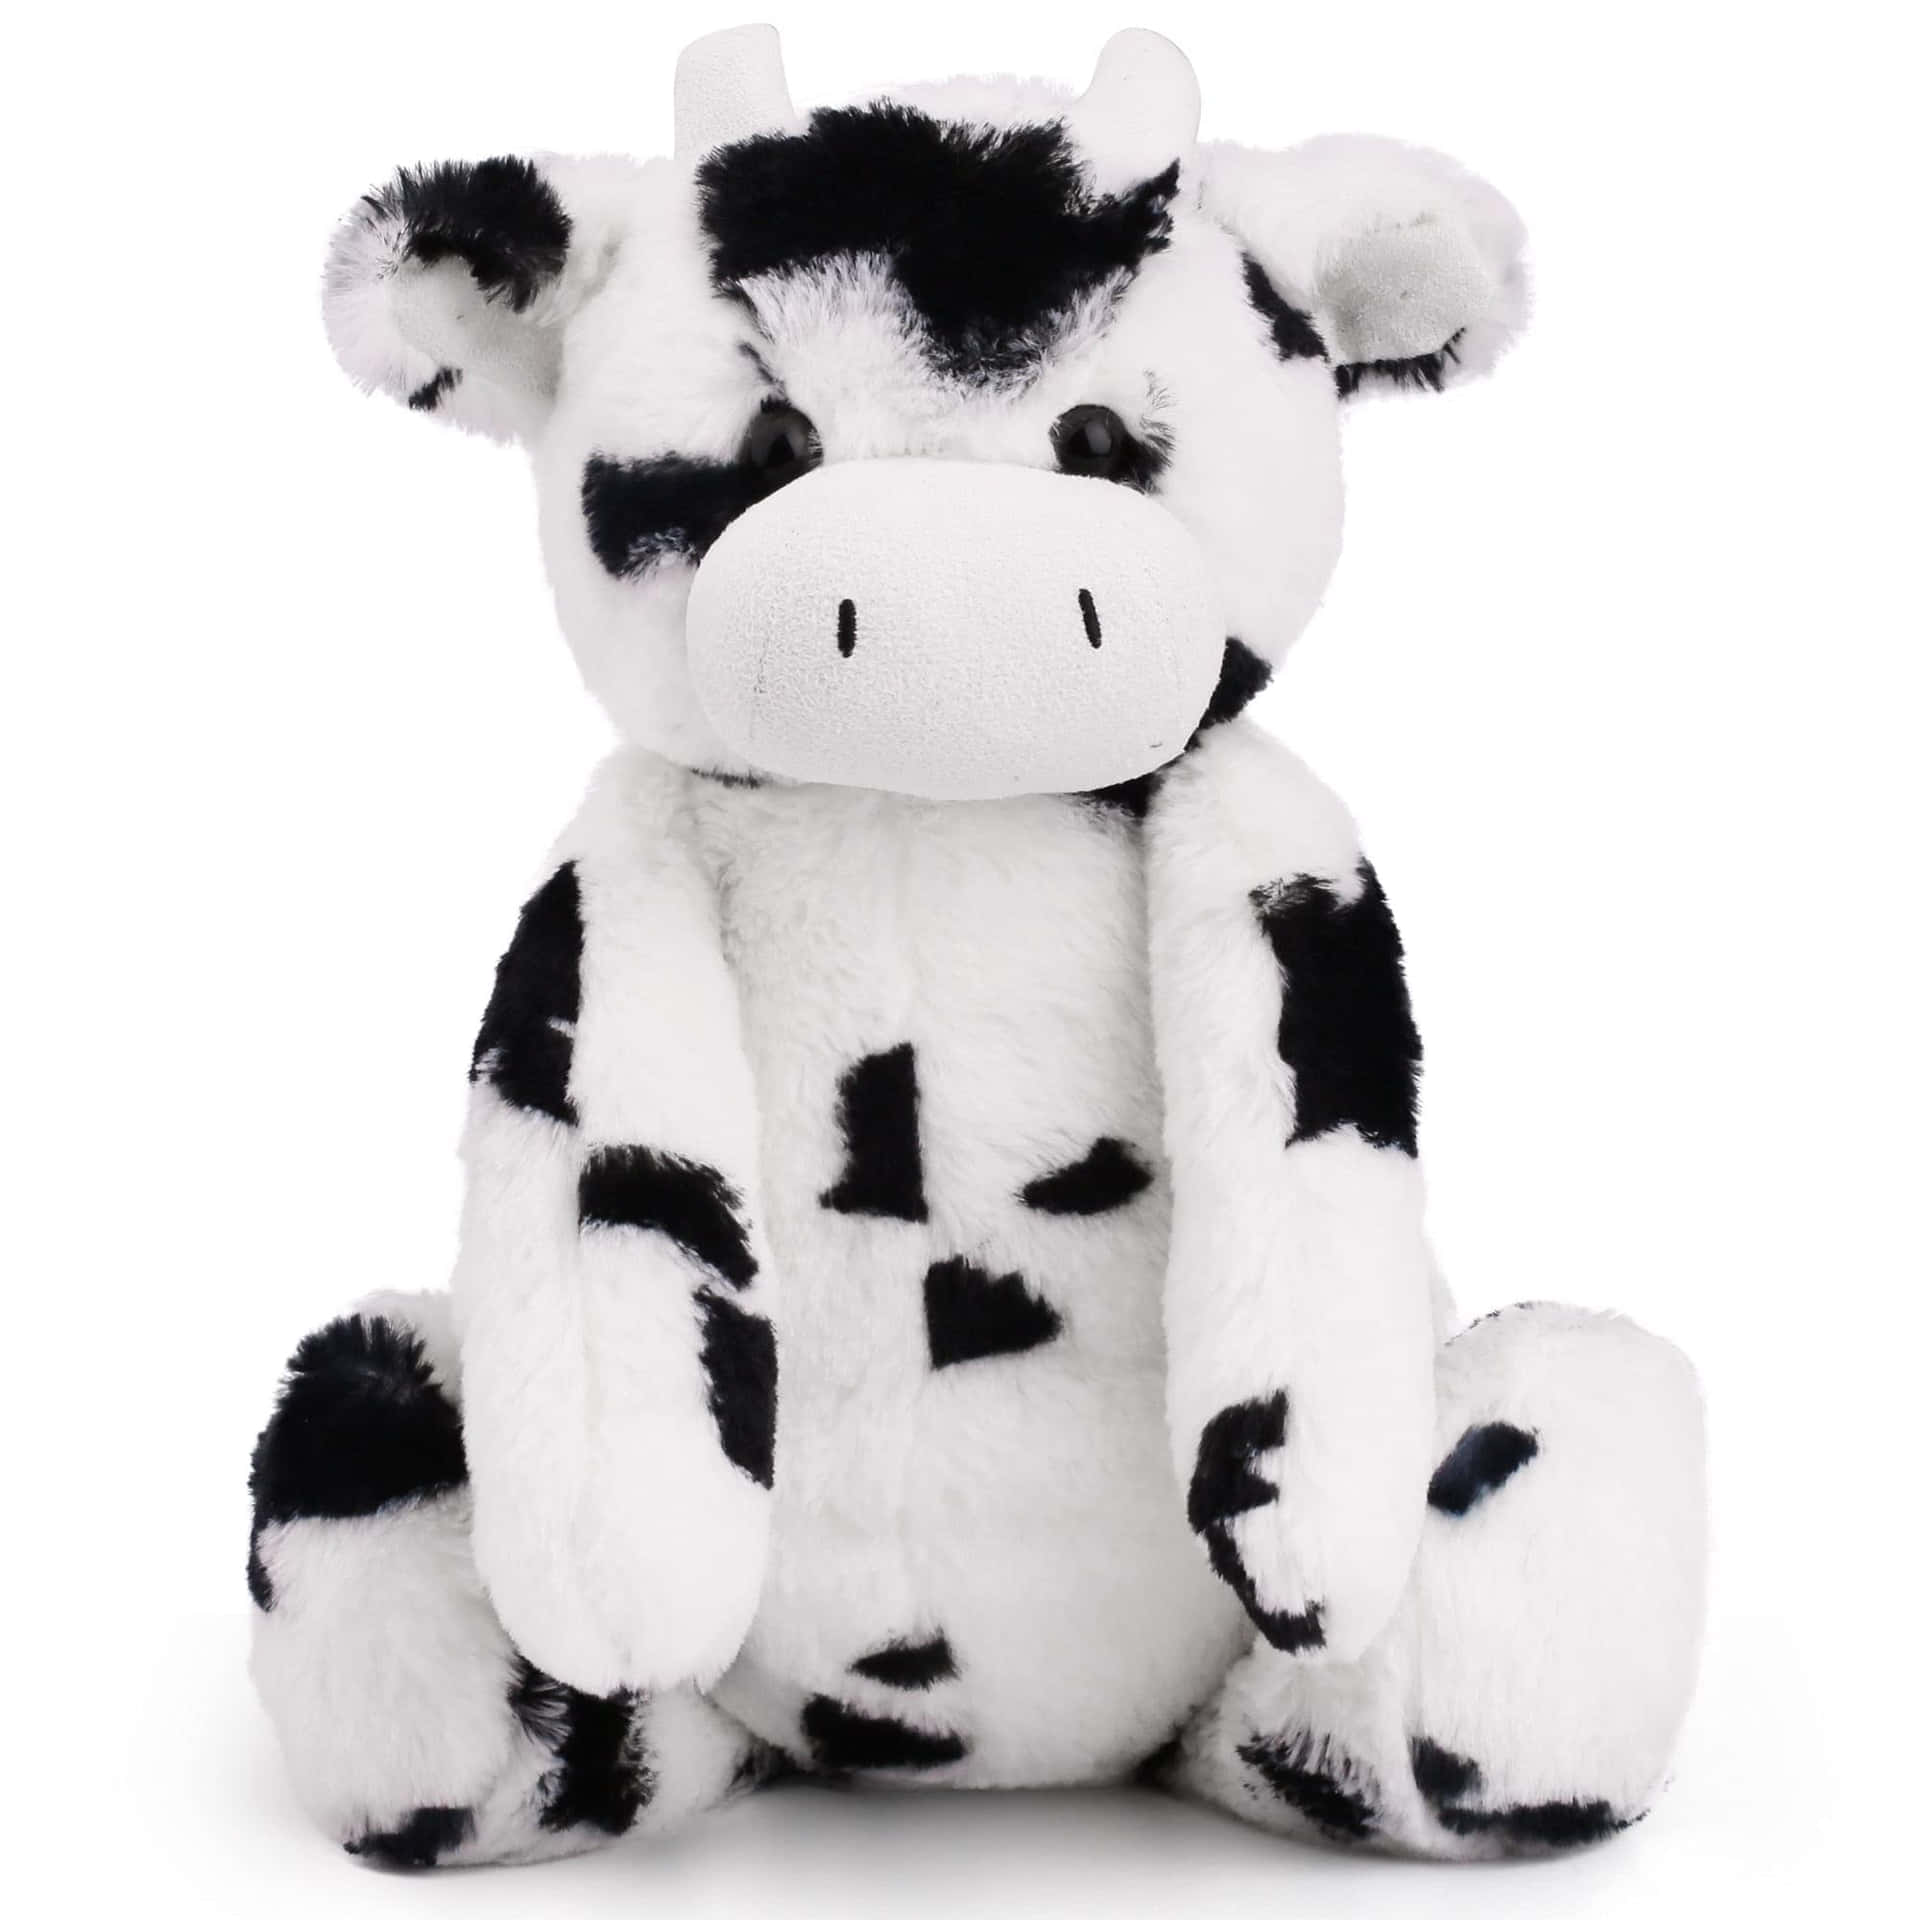 A Black And White Cow Stuffed Animal